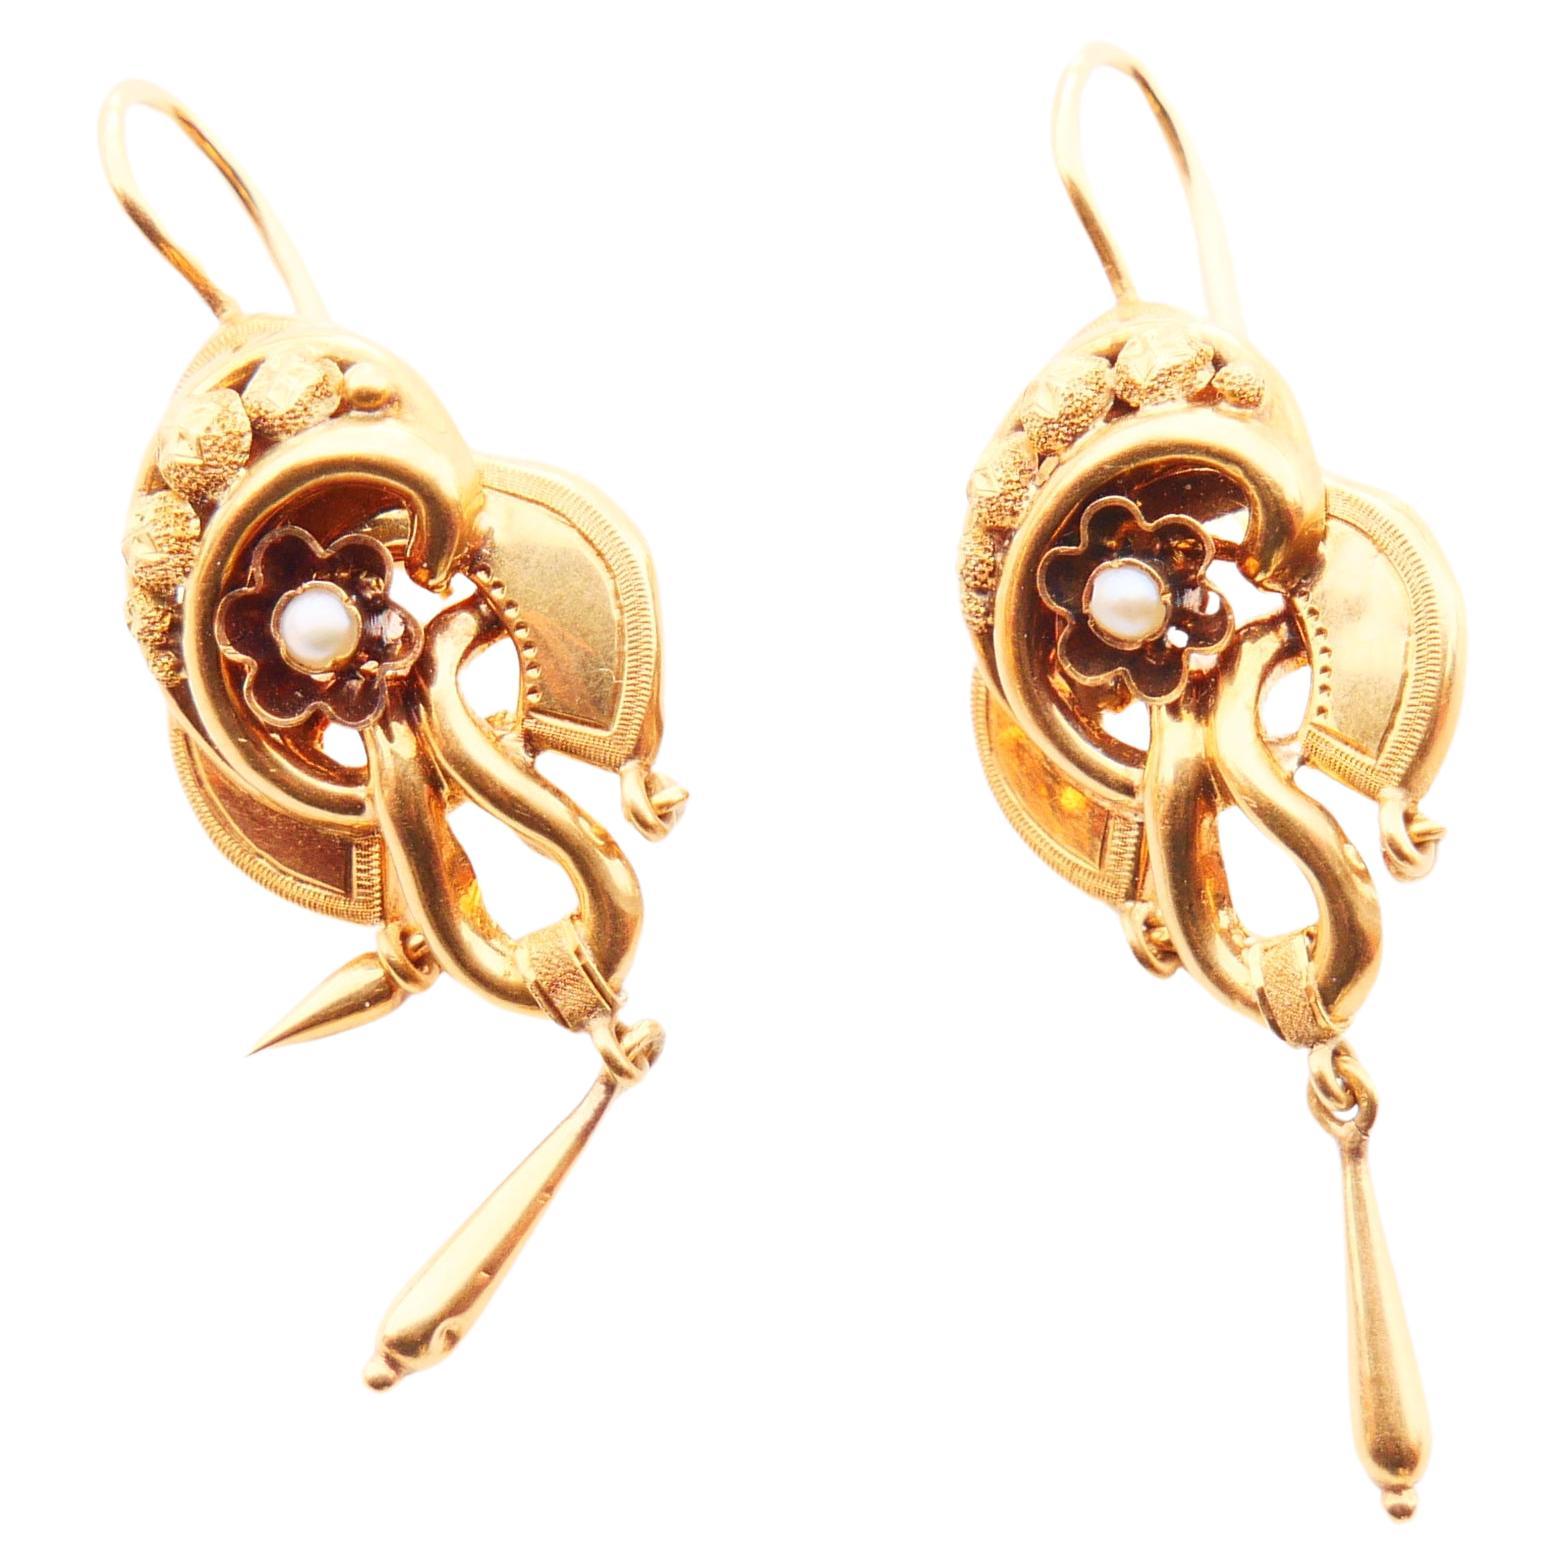 1871 Antique European Earrings solid 18K Gold Seed Pearls / 4.7gr For Sale